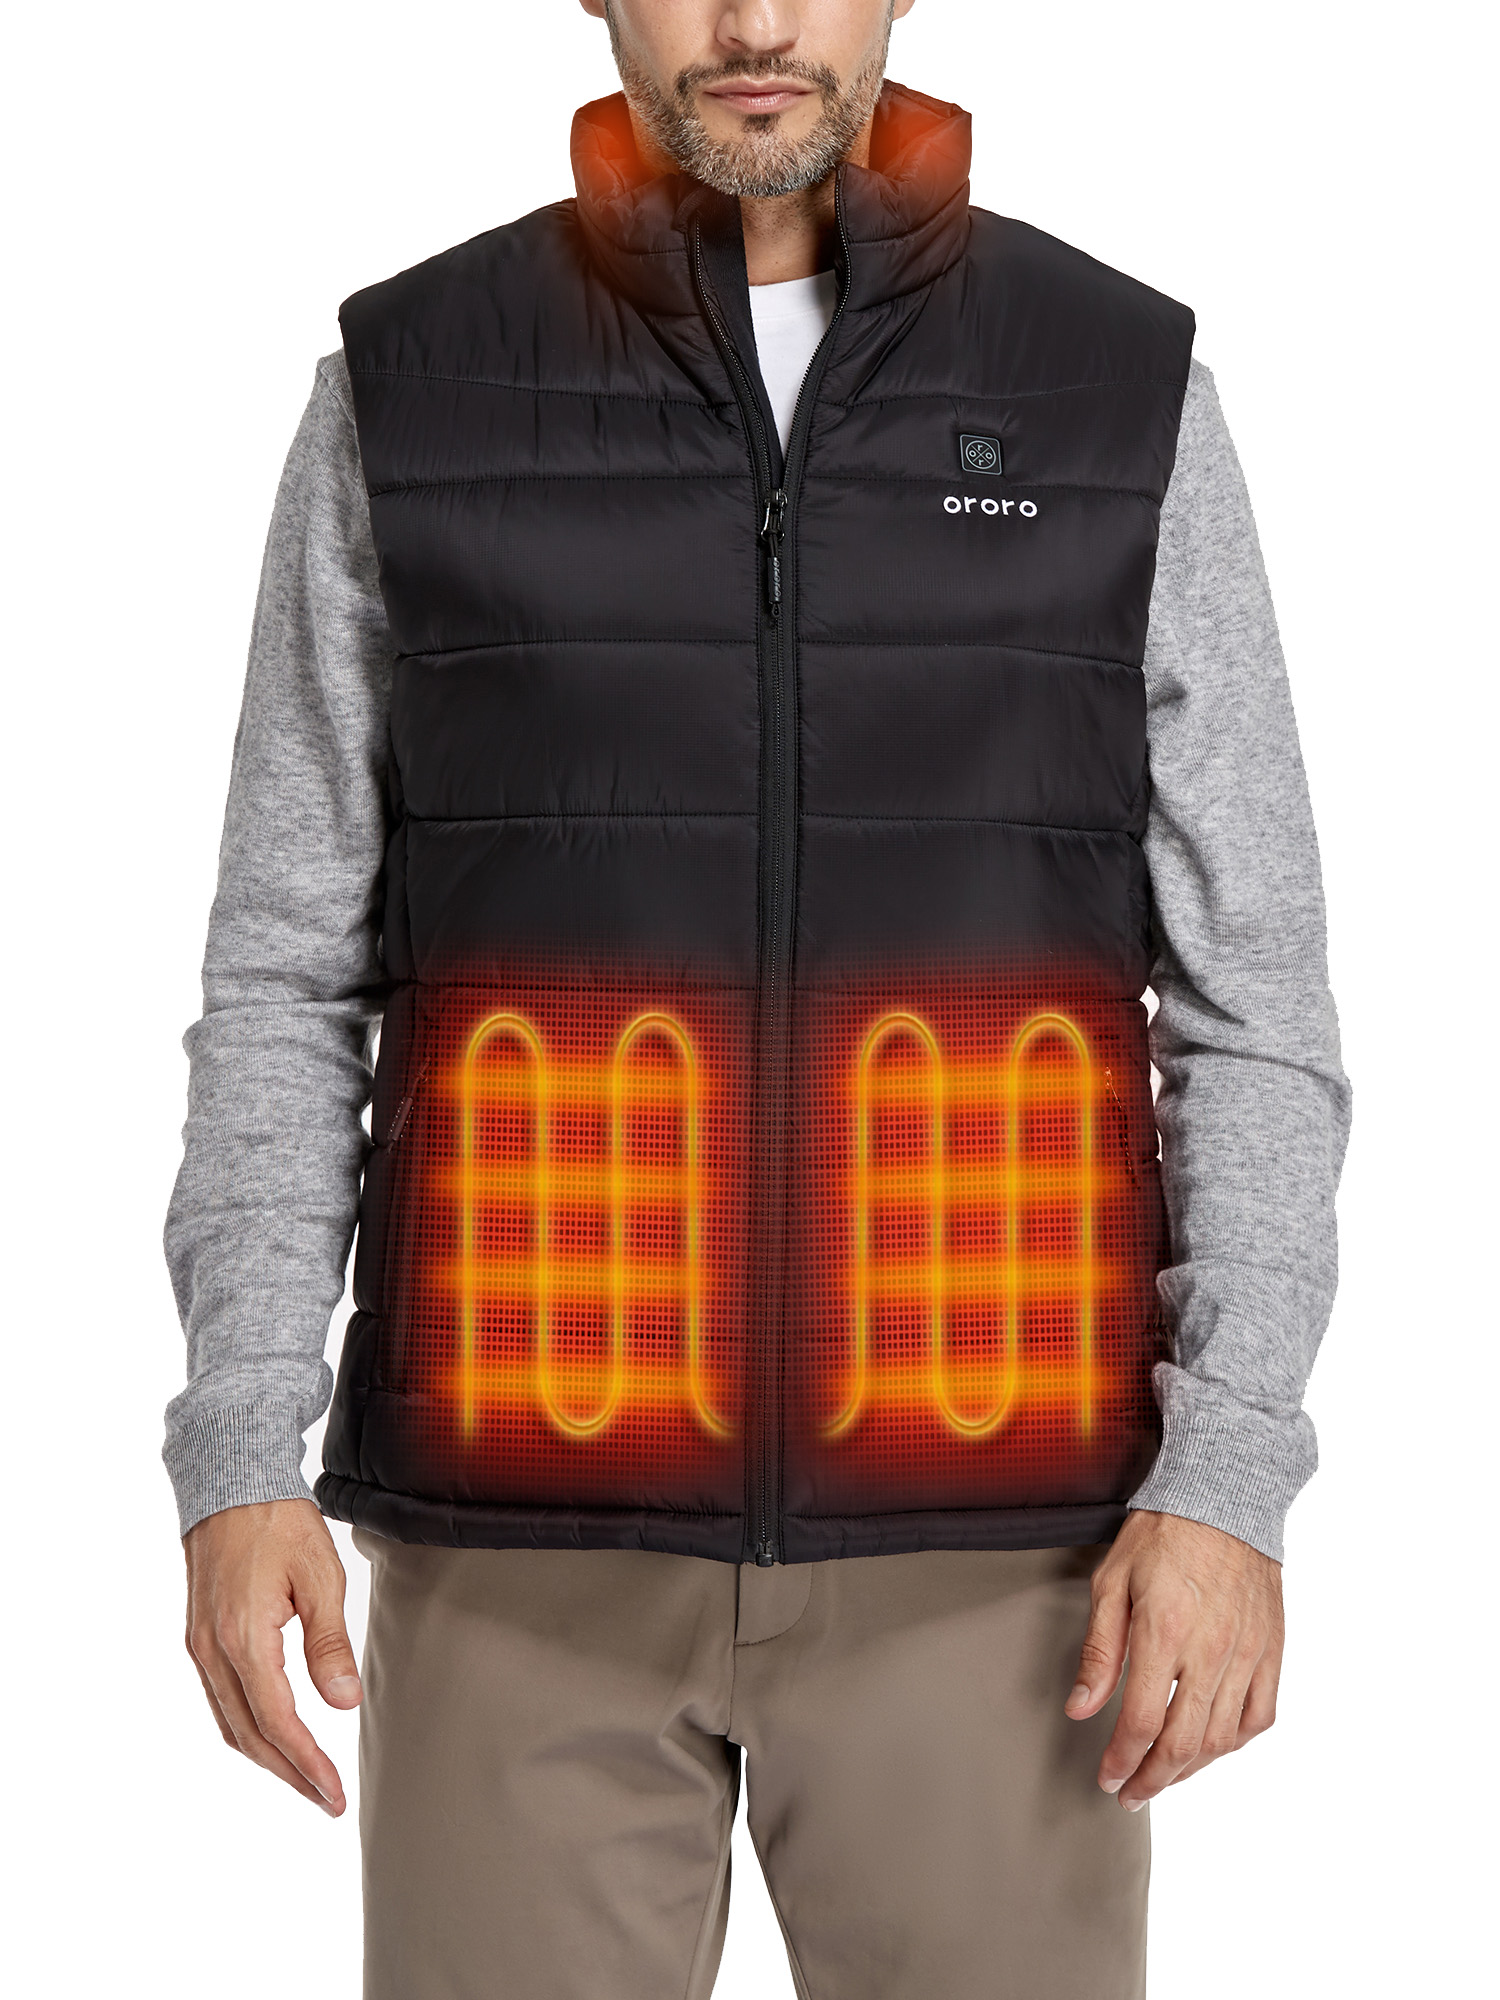 ORORO Men's Heated Vest with Battery, Heating Vest for Hiking Skiing Outdoors (Black, L) - image 1 of 12